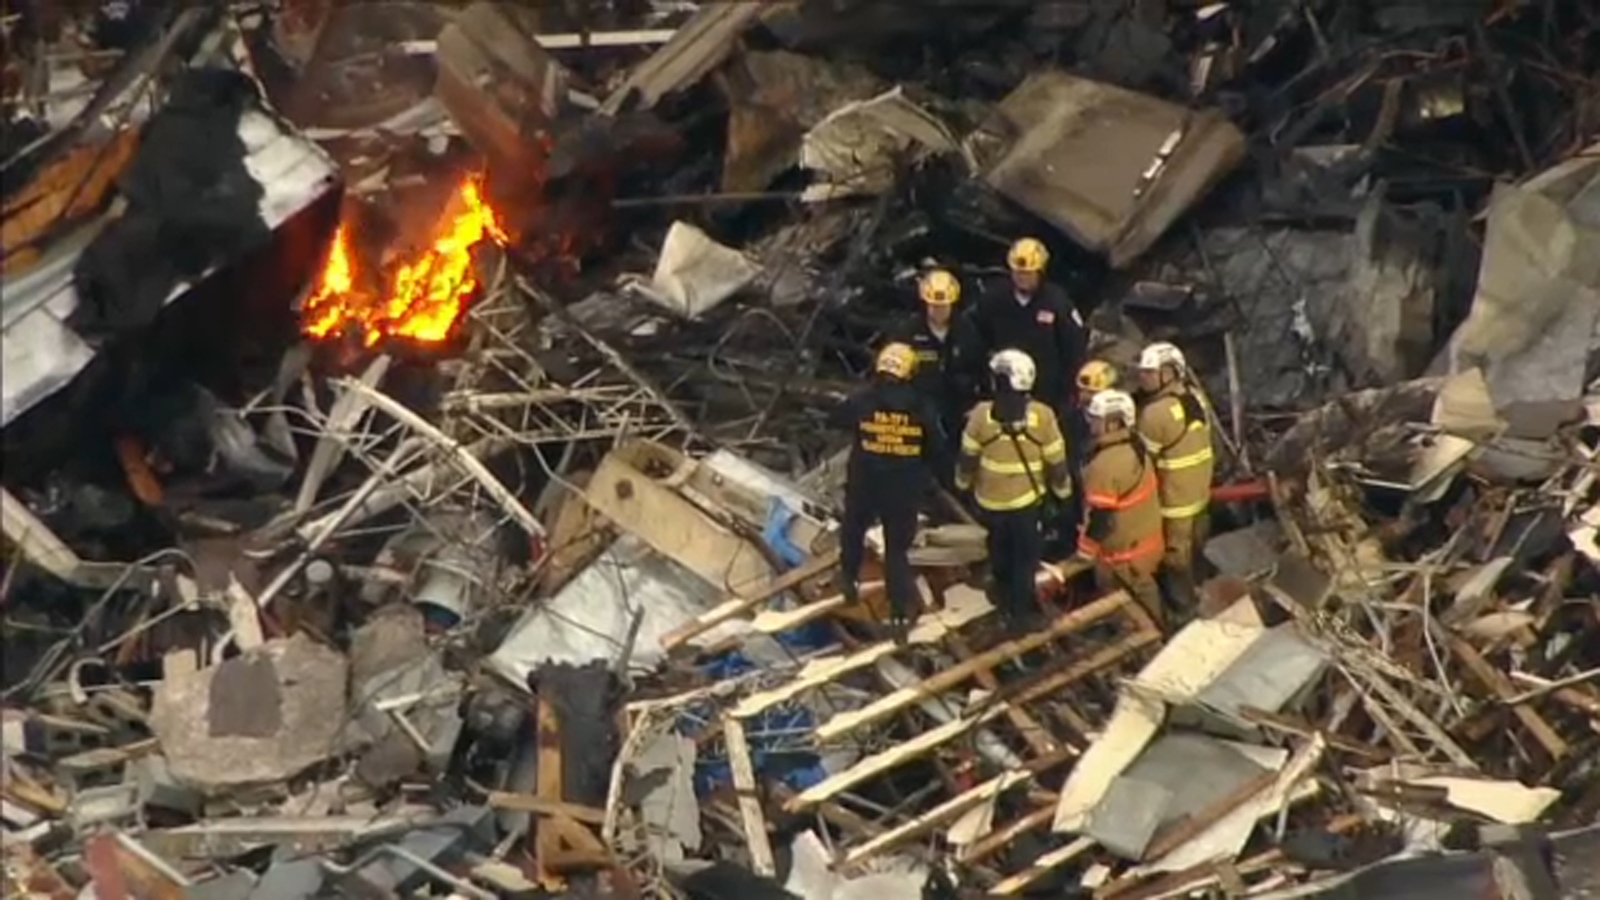  7 dead after Pennsylvania chocolate factory explosion; 1 person found alive in rubble 